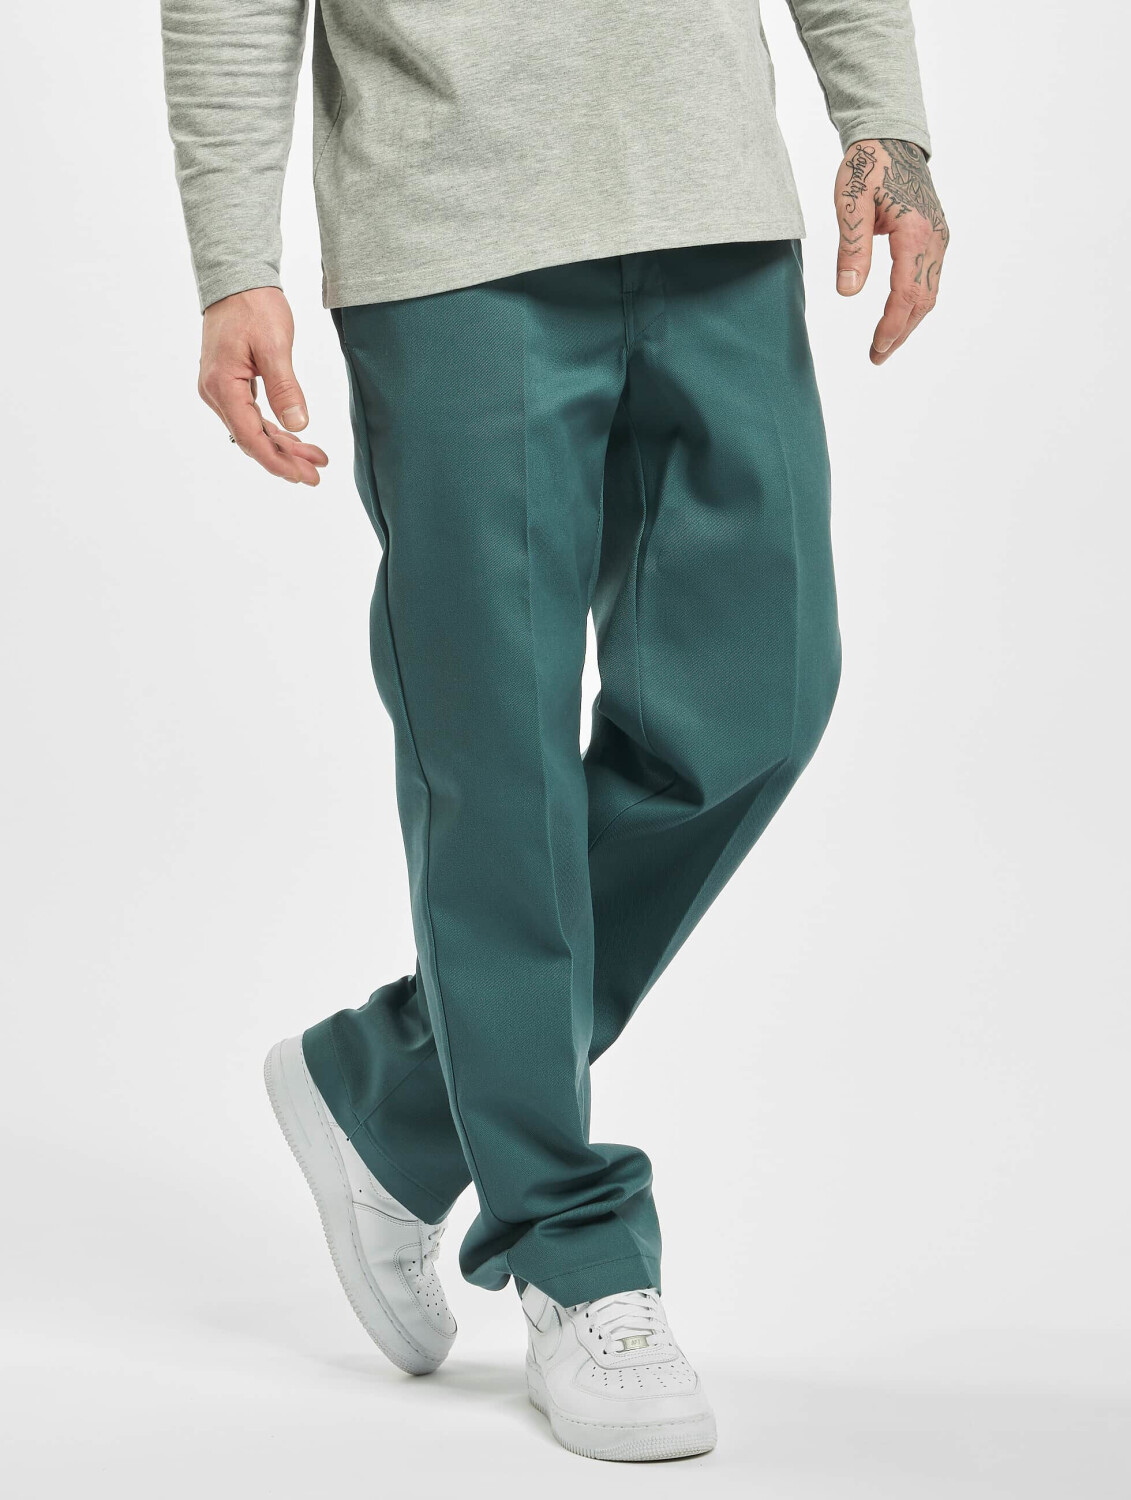 Buy Dickies Original Work Pant (874) lincoln green from £49.04 (Today) –  Best Deals on